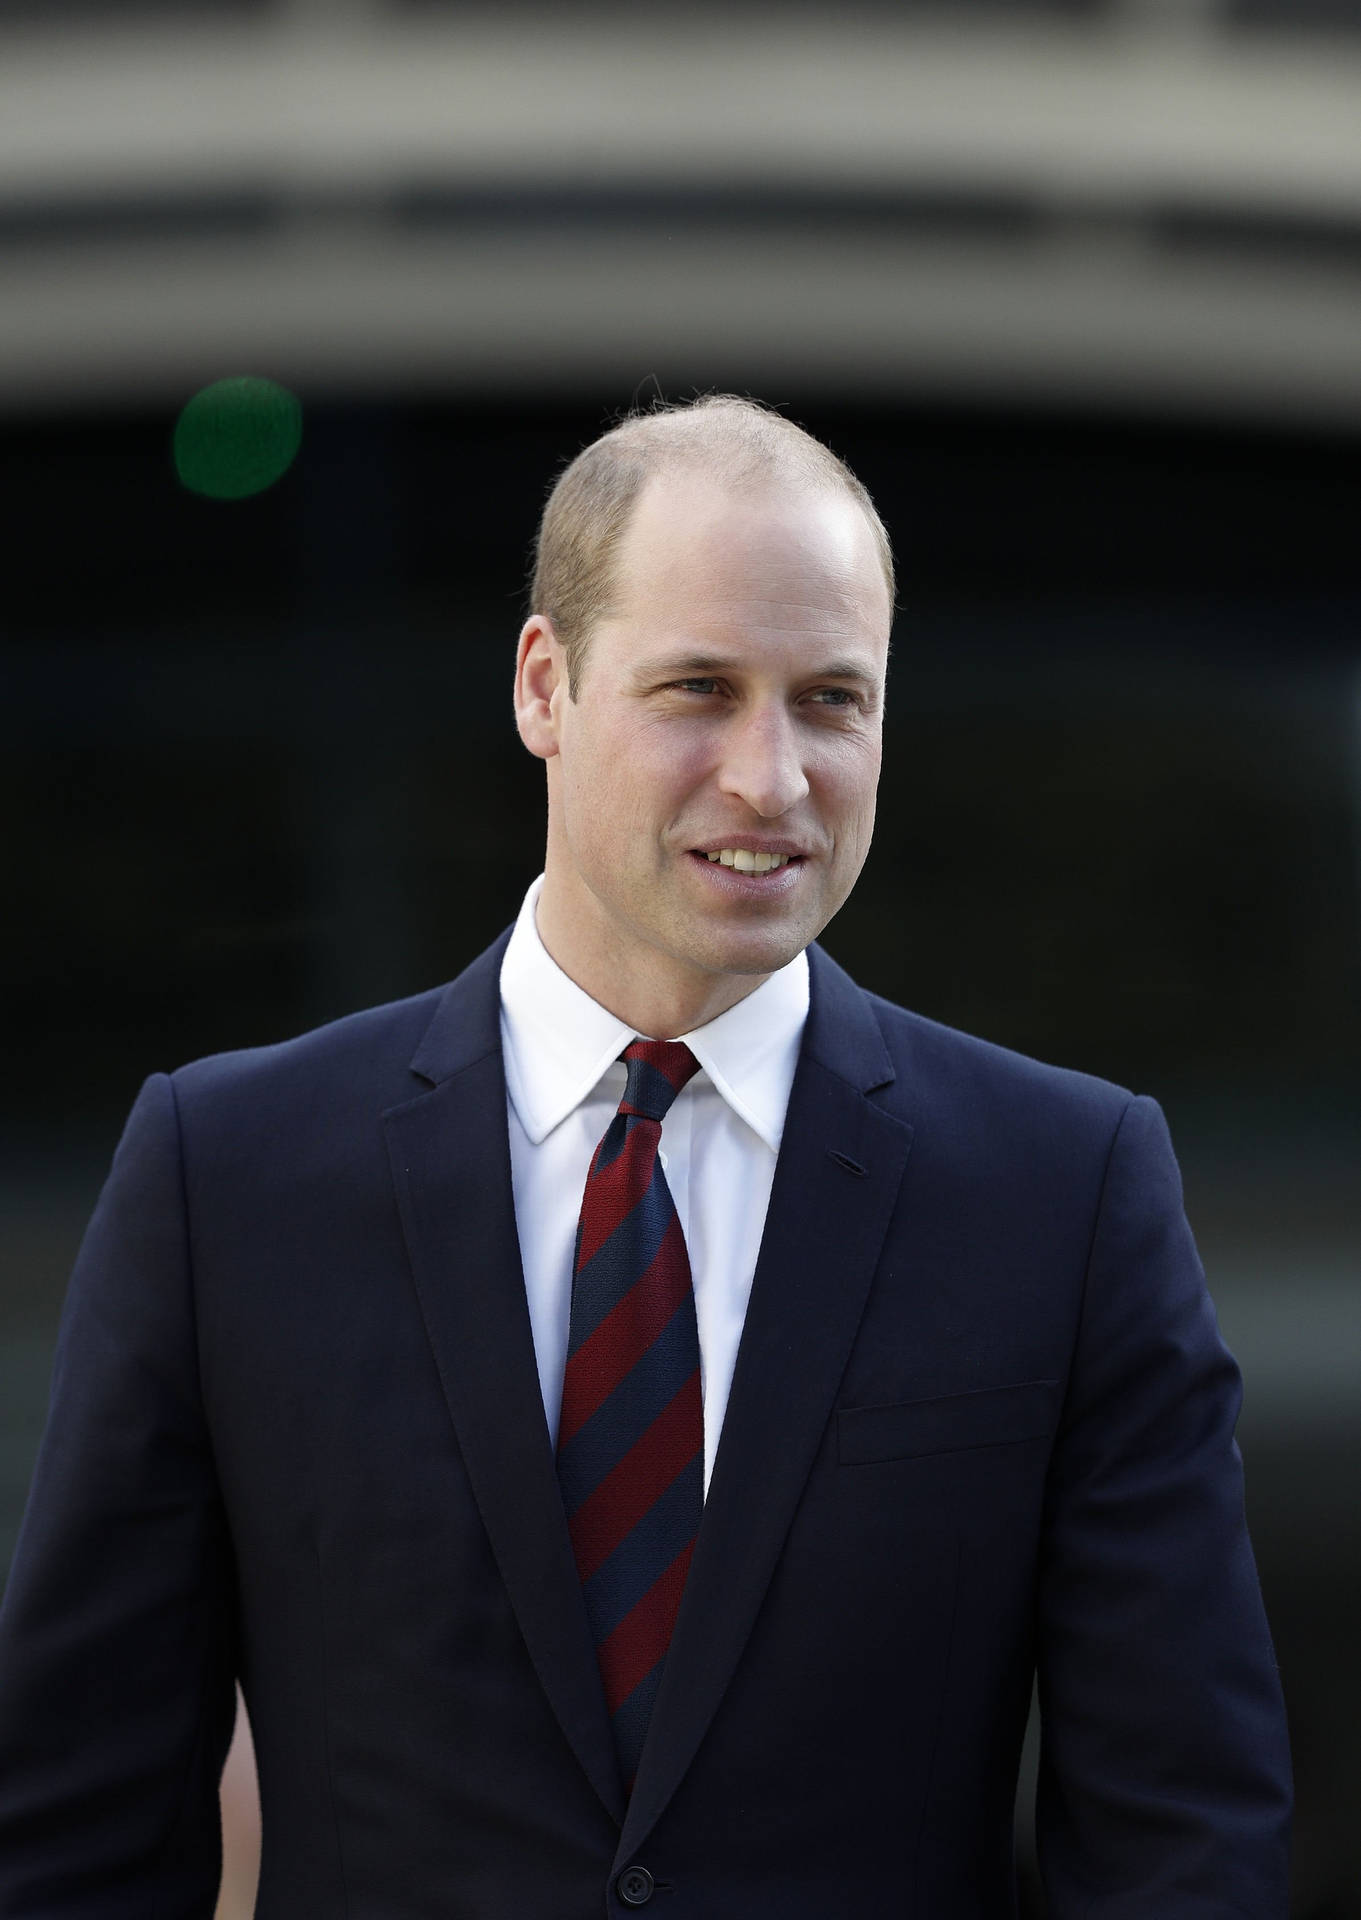 Prince William Wearing Suit And Tie